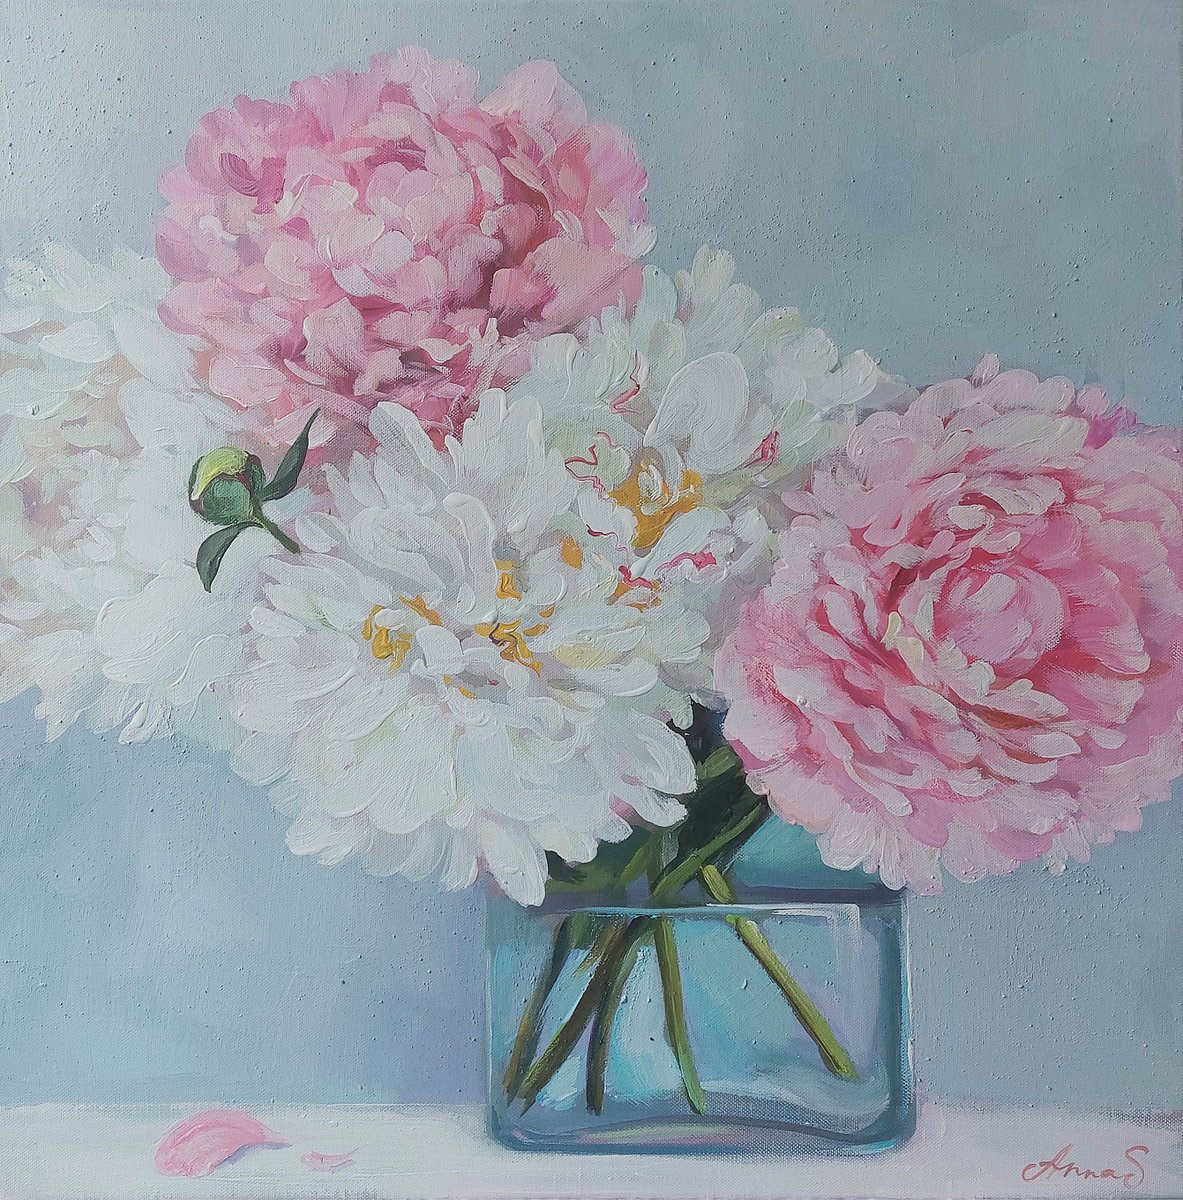 Peonies in a vase by Anna Silabrama